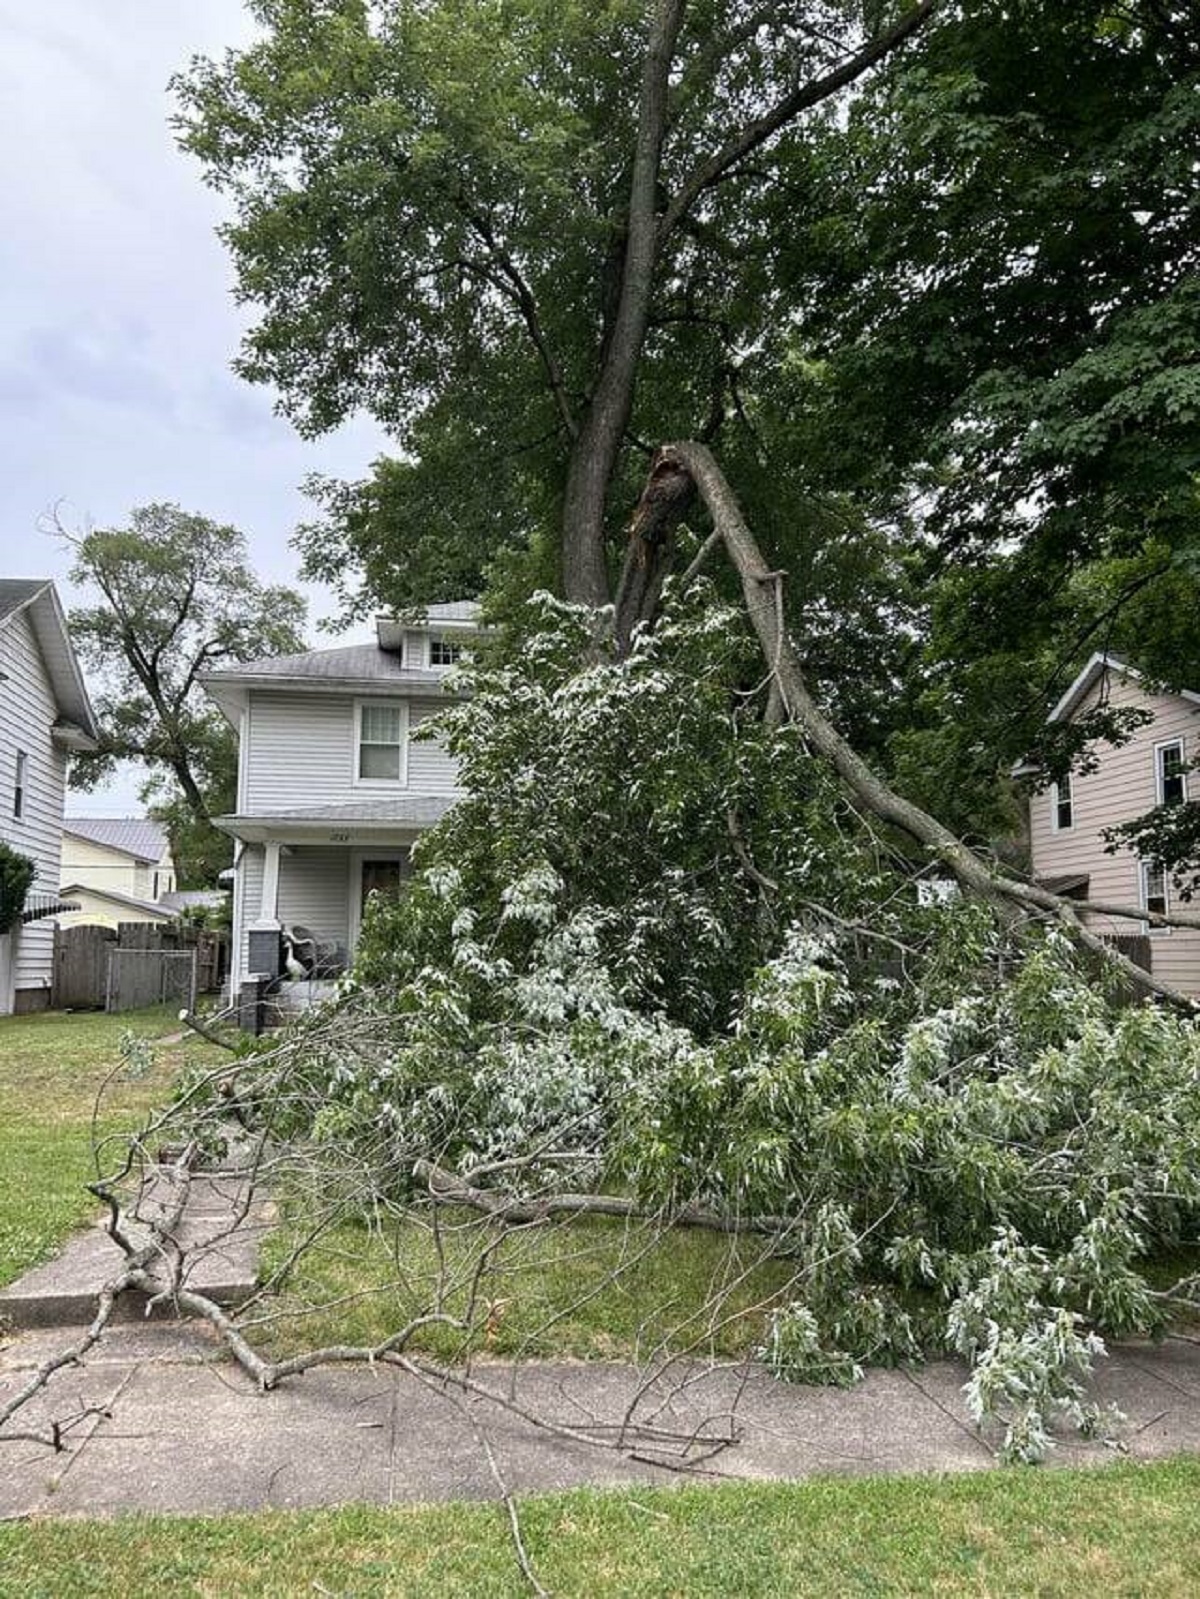 "Got a call that a limb fell in my yard. Was not expecting this…"